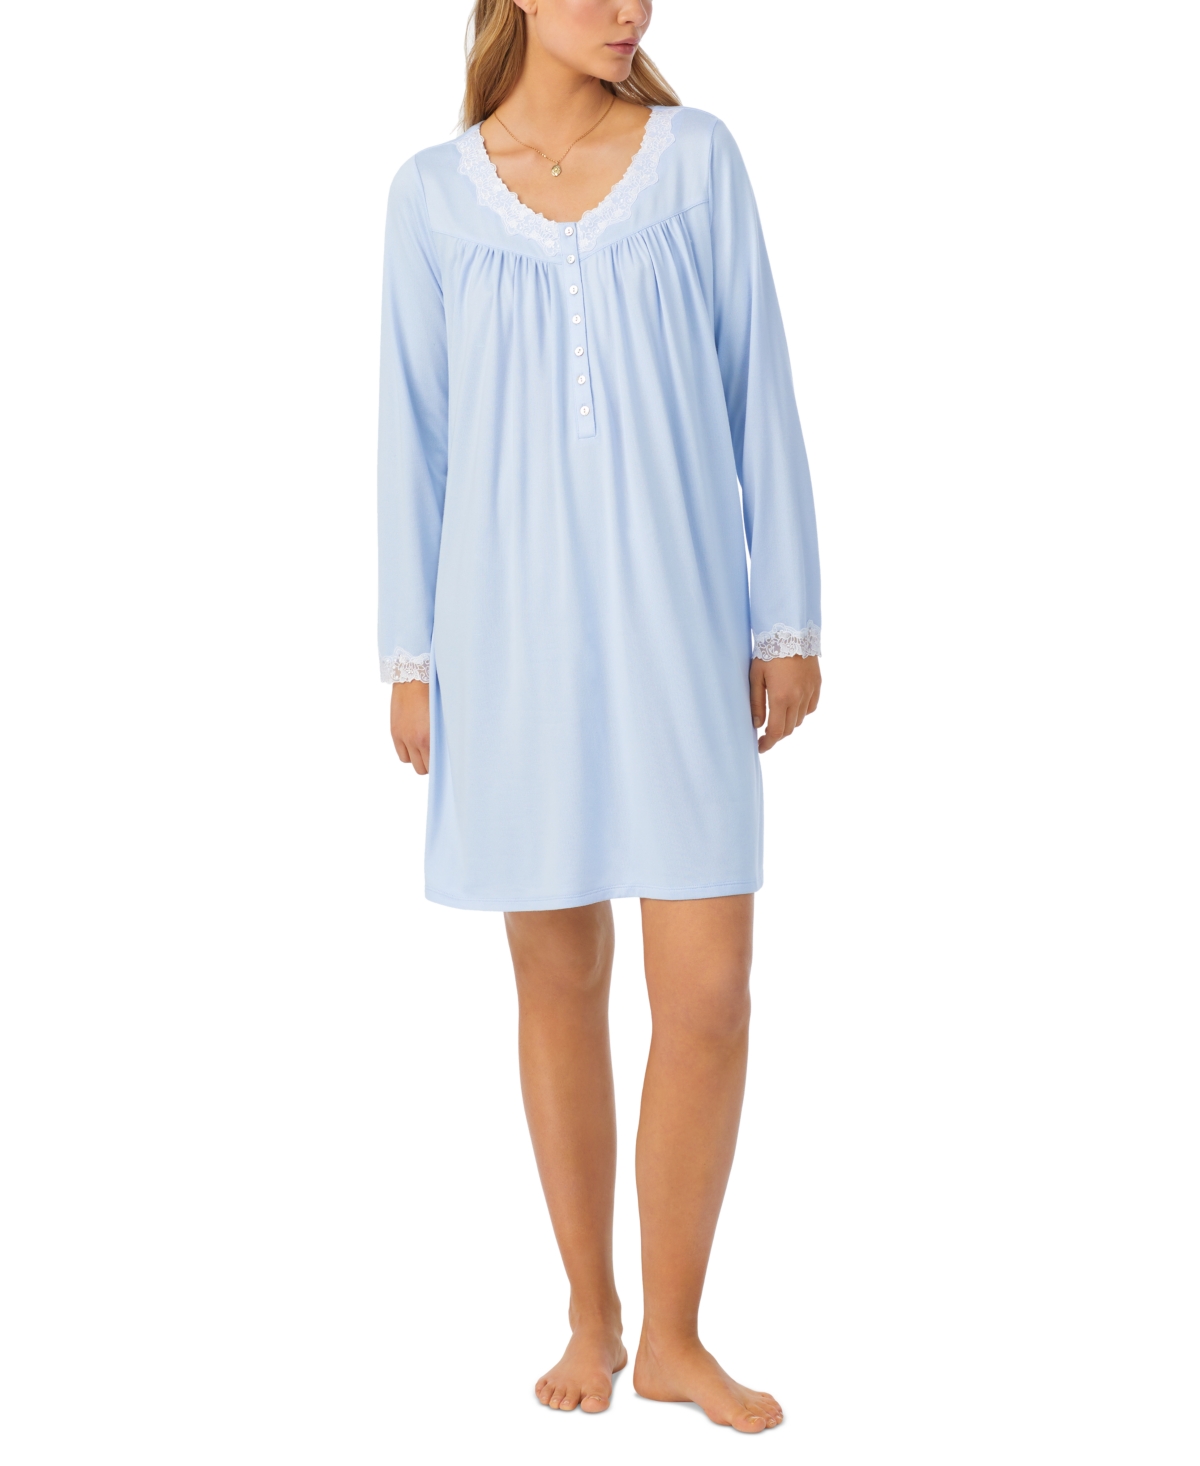 Women's Sweater-Knit Lace-Trim Nightgown - Country Blue